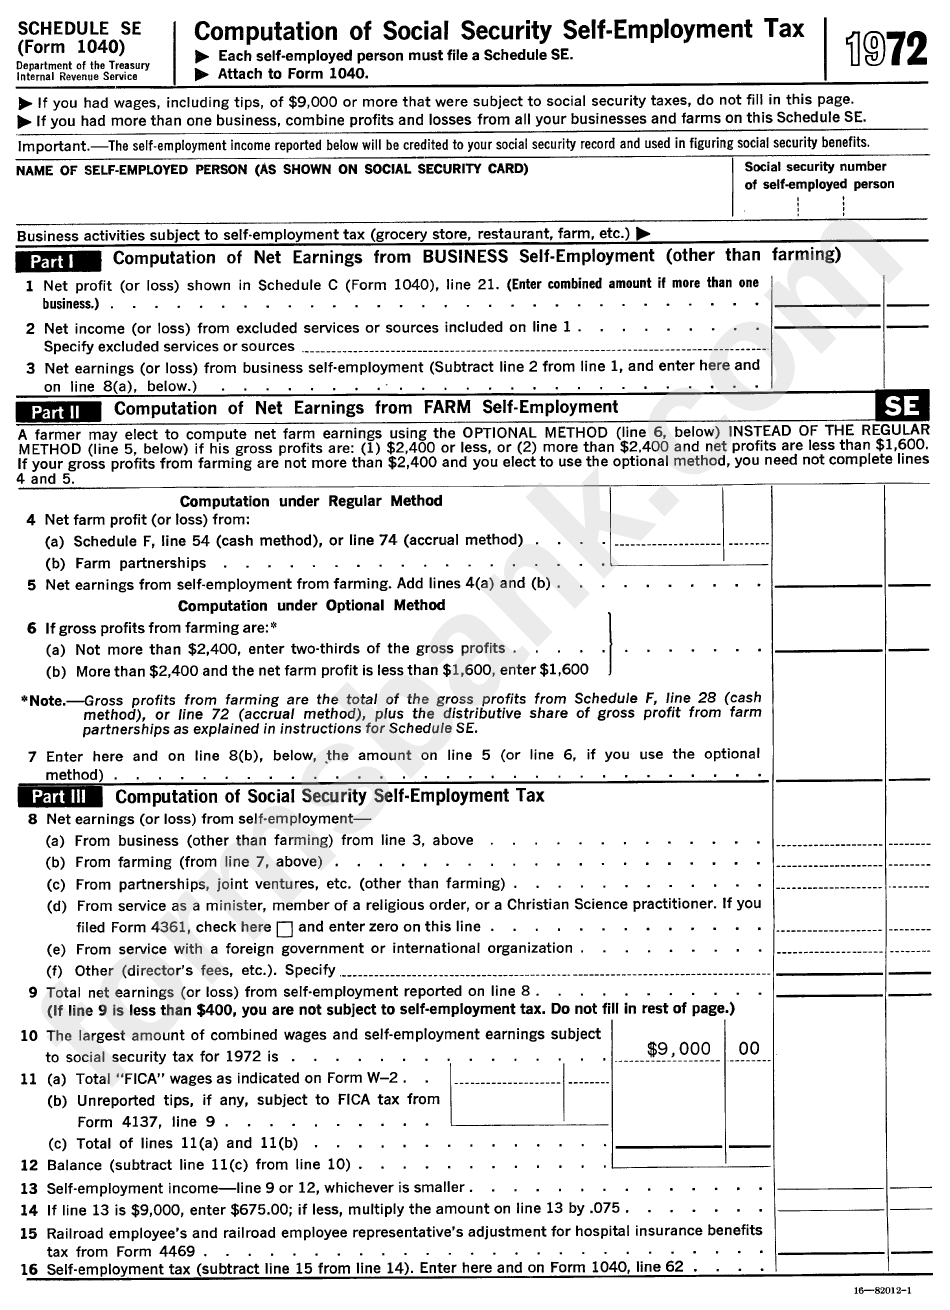 Schedule Se (Form 1040) - Computation Of Social Security Self-Employment Tax - 1972